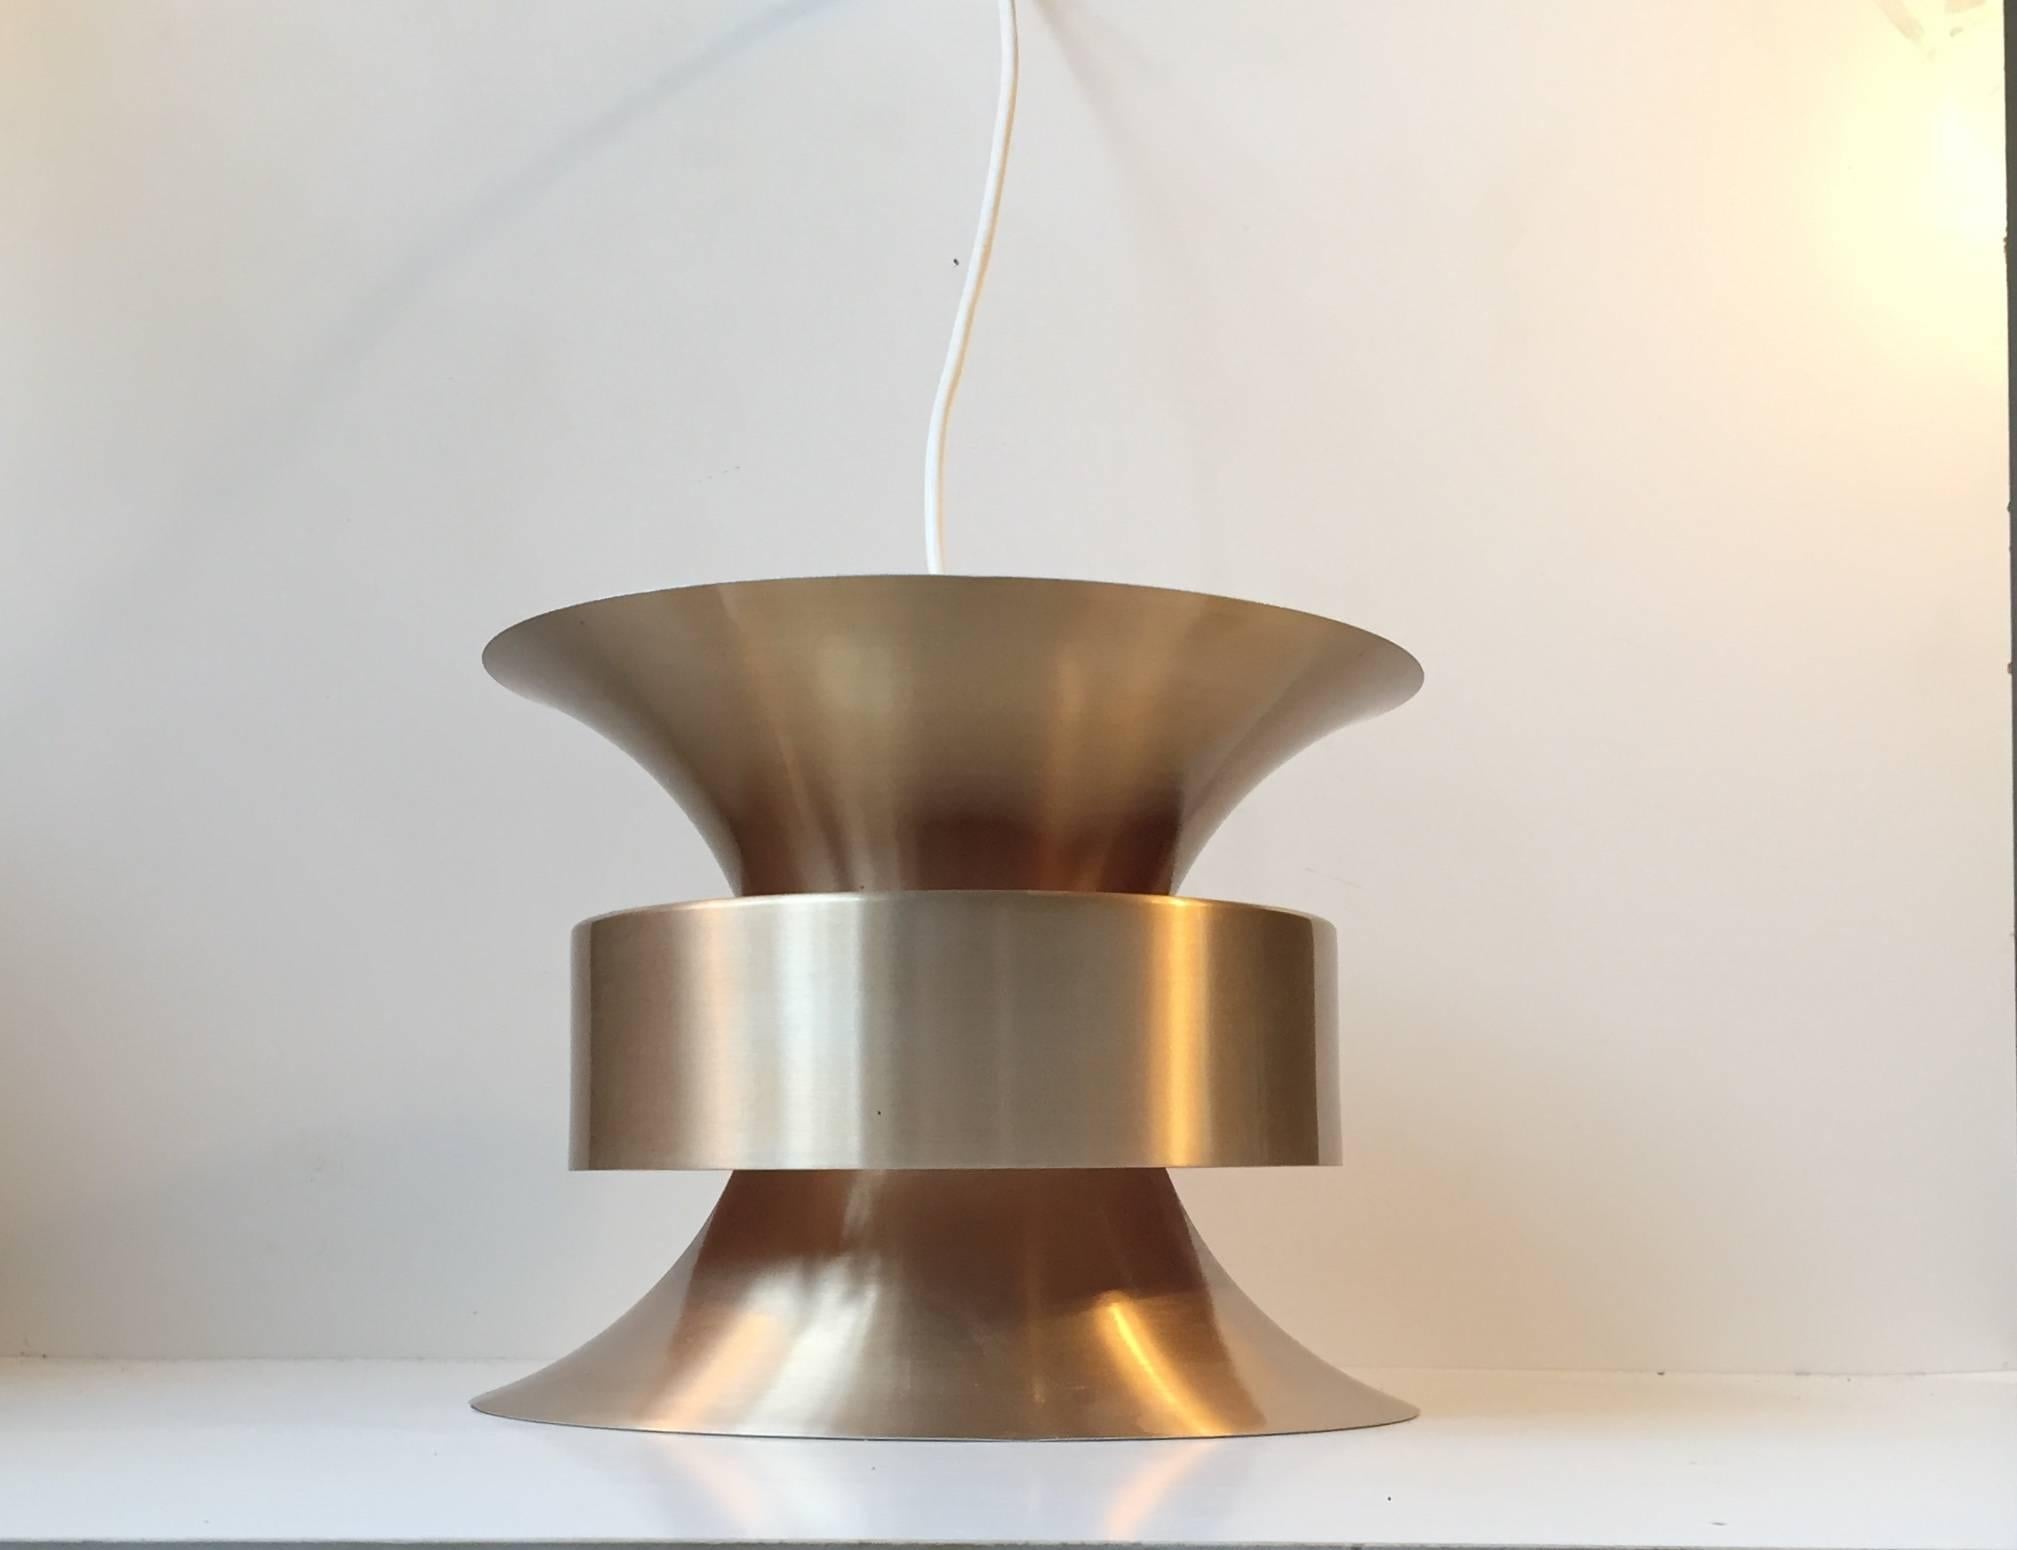 This pendant light was designed by Bent Nordsted. It was manufactured in the 1960s-1970s and is made from brass-alloy aluminum, and has orange and white reflective inner shades.